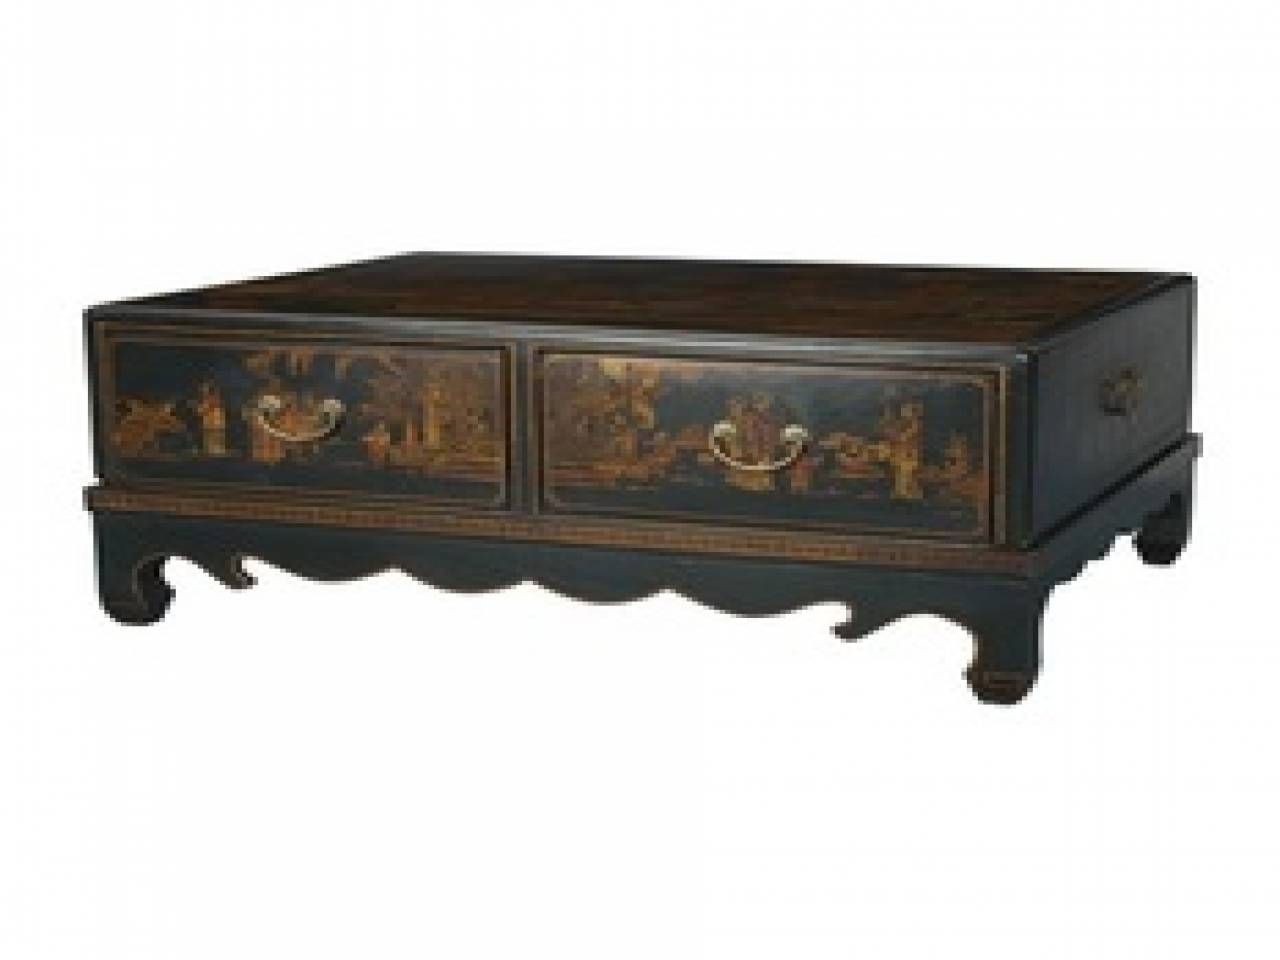 Stylish Oriental Coffee Table With Asian Inspired Coffee Tables Pertaining To Asian Coffee Tables (View 15 of 30)